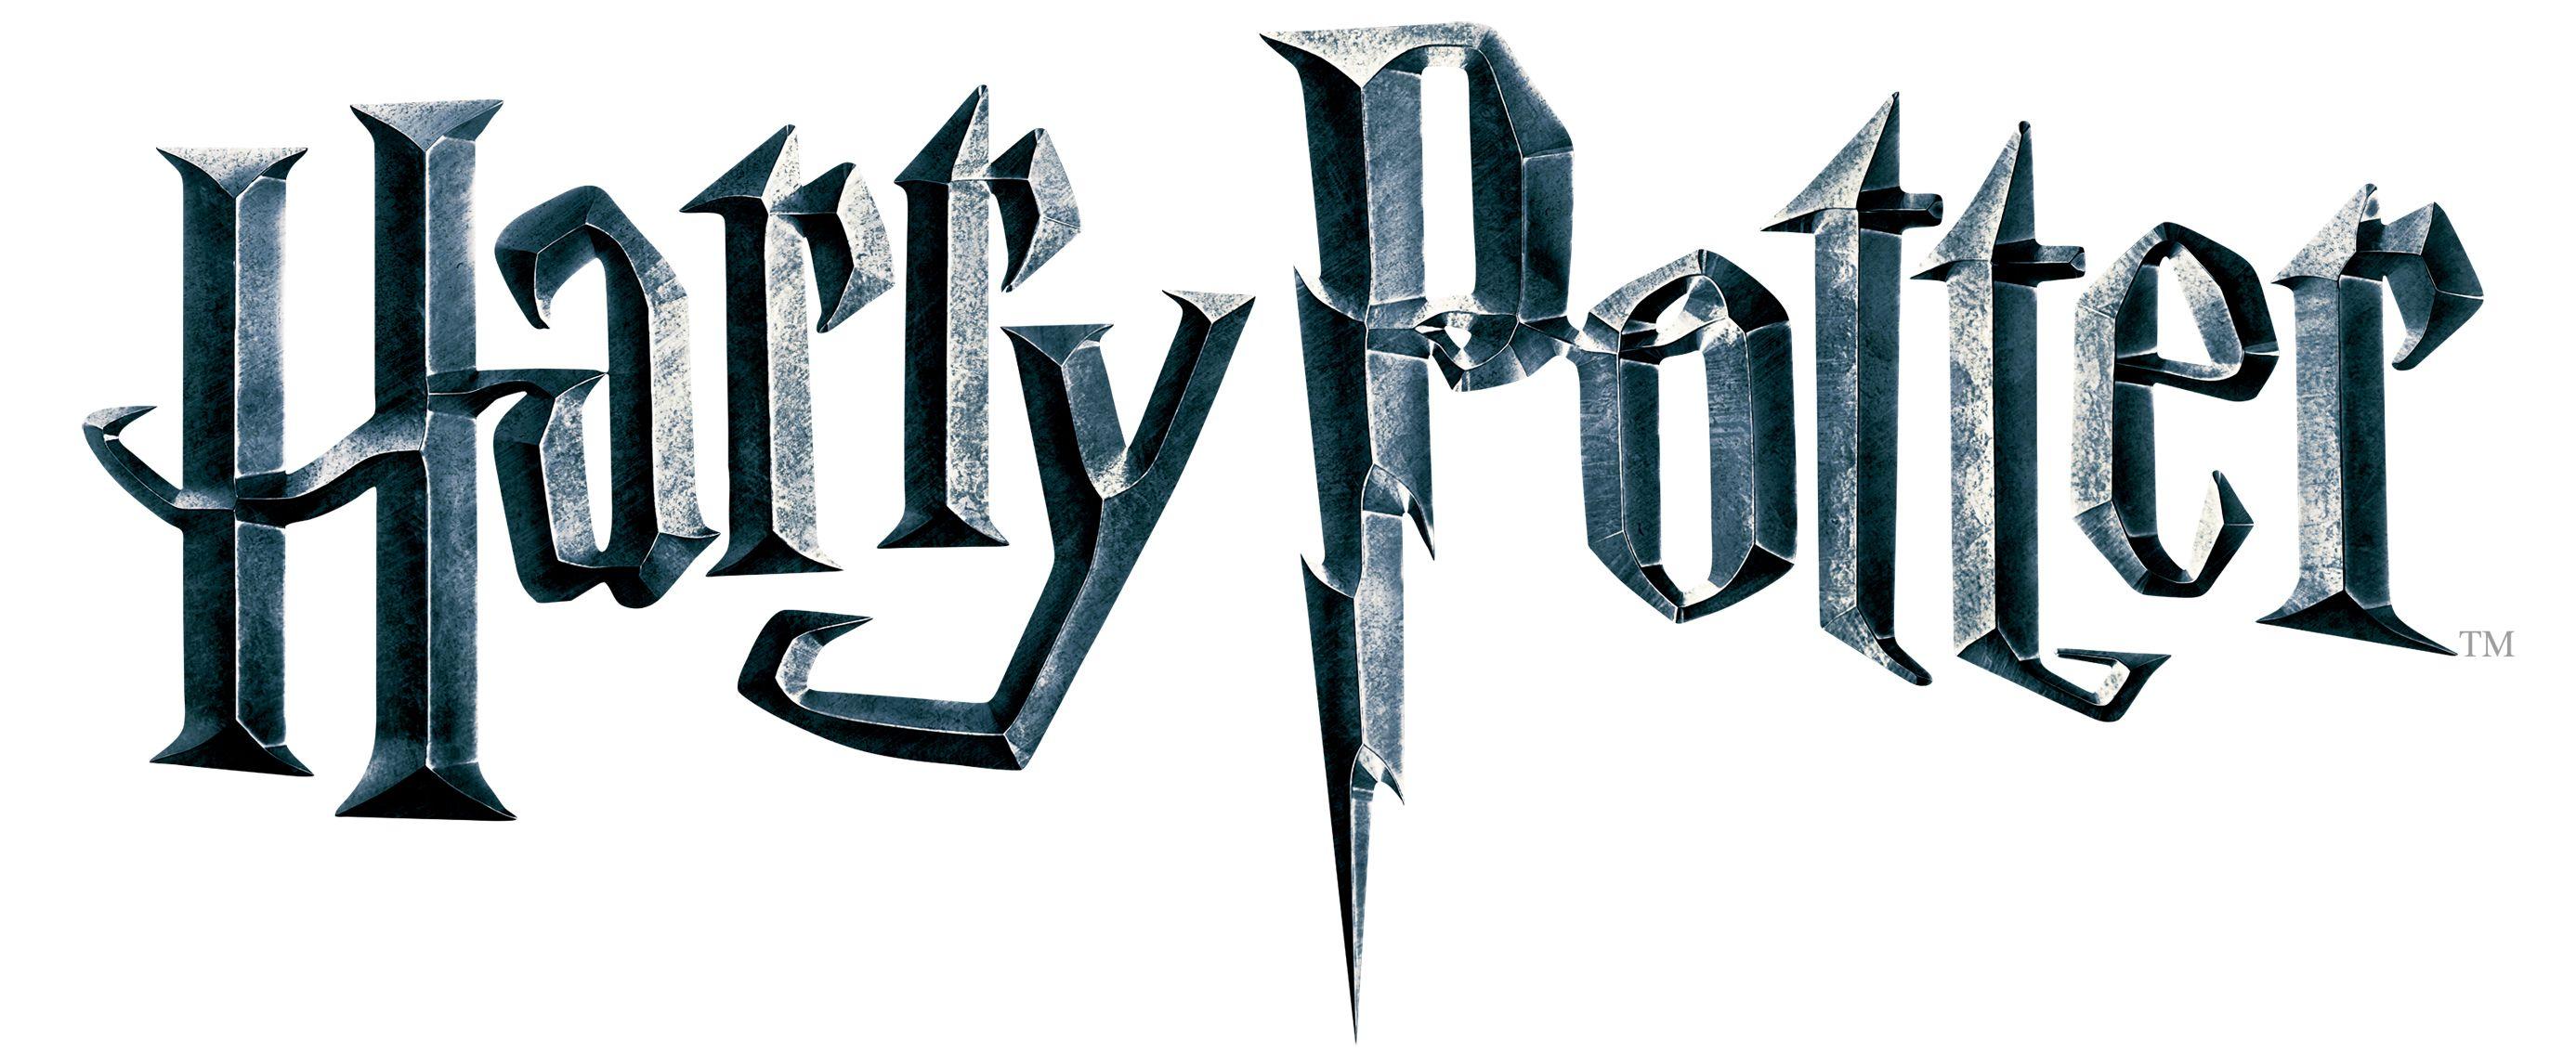 New Harry Potter Logo - Harry Potter Colouring Book